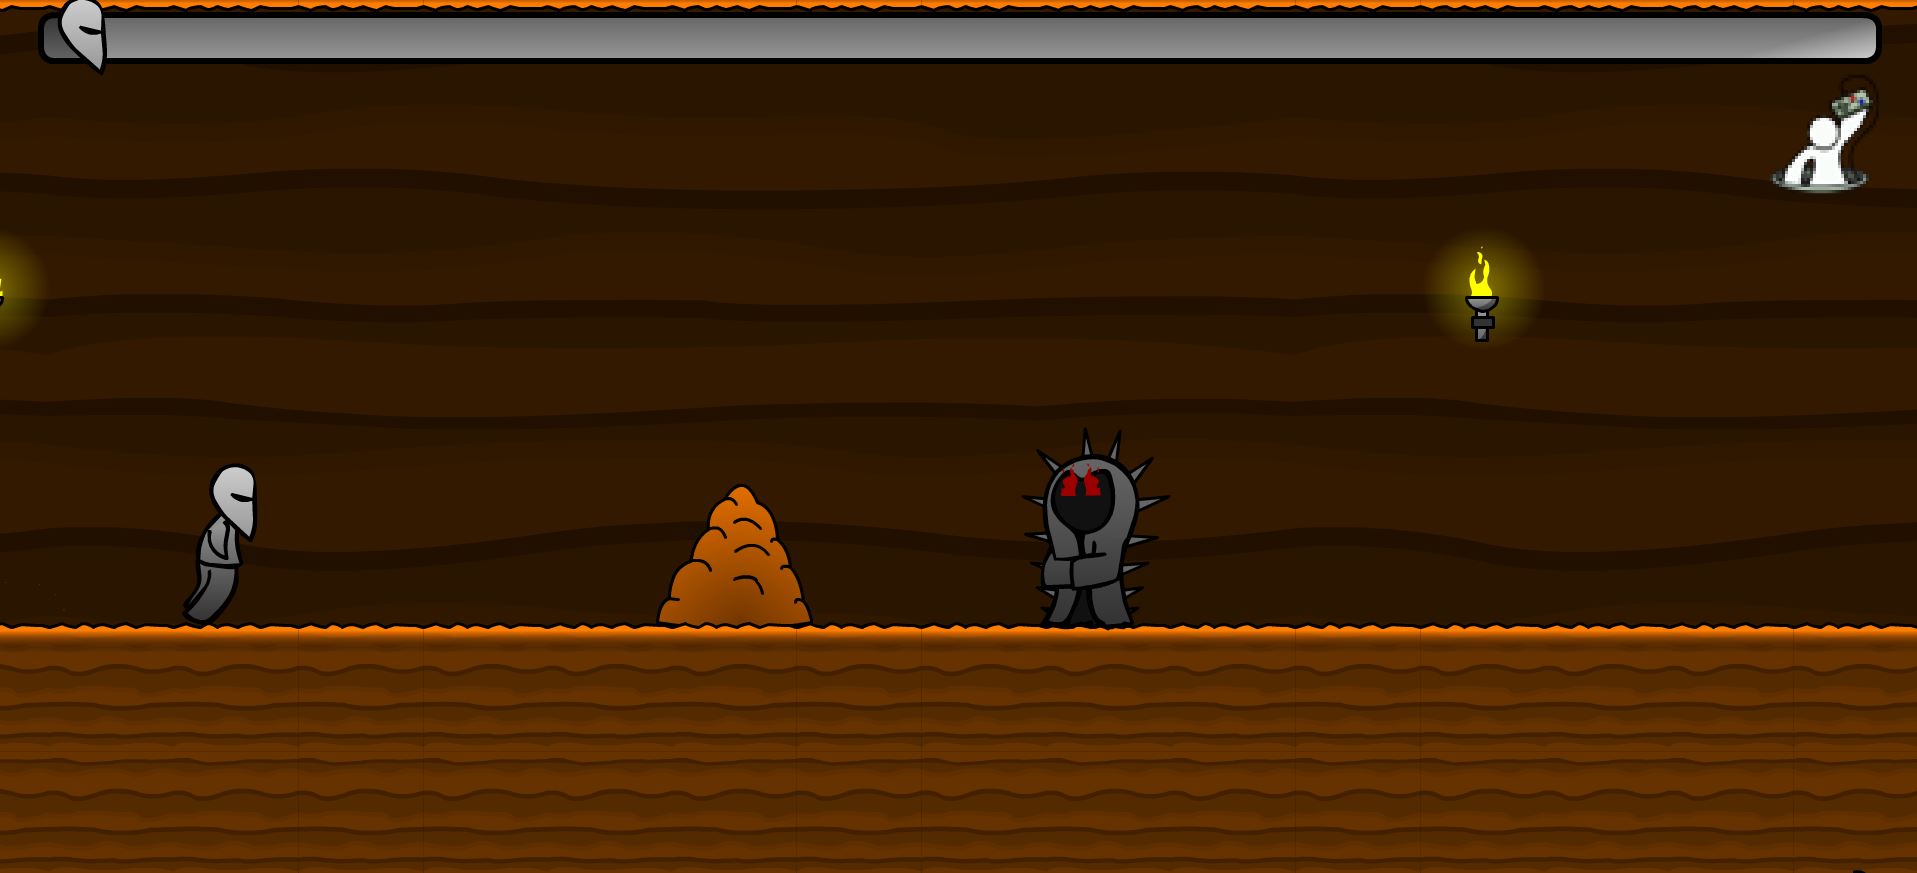 Another Cave Runner, Web Gaming Wiki